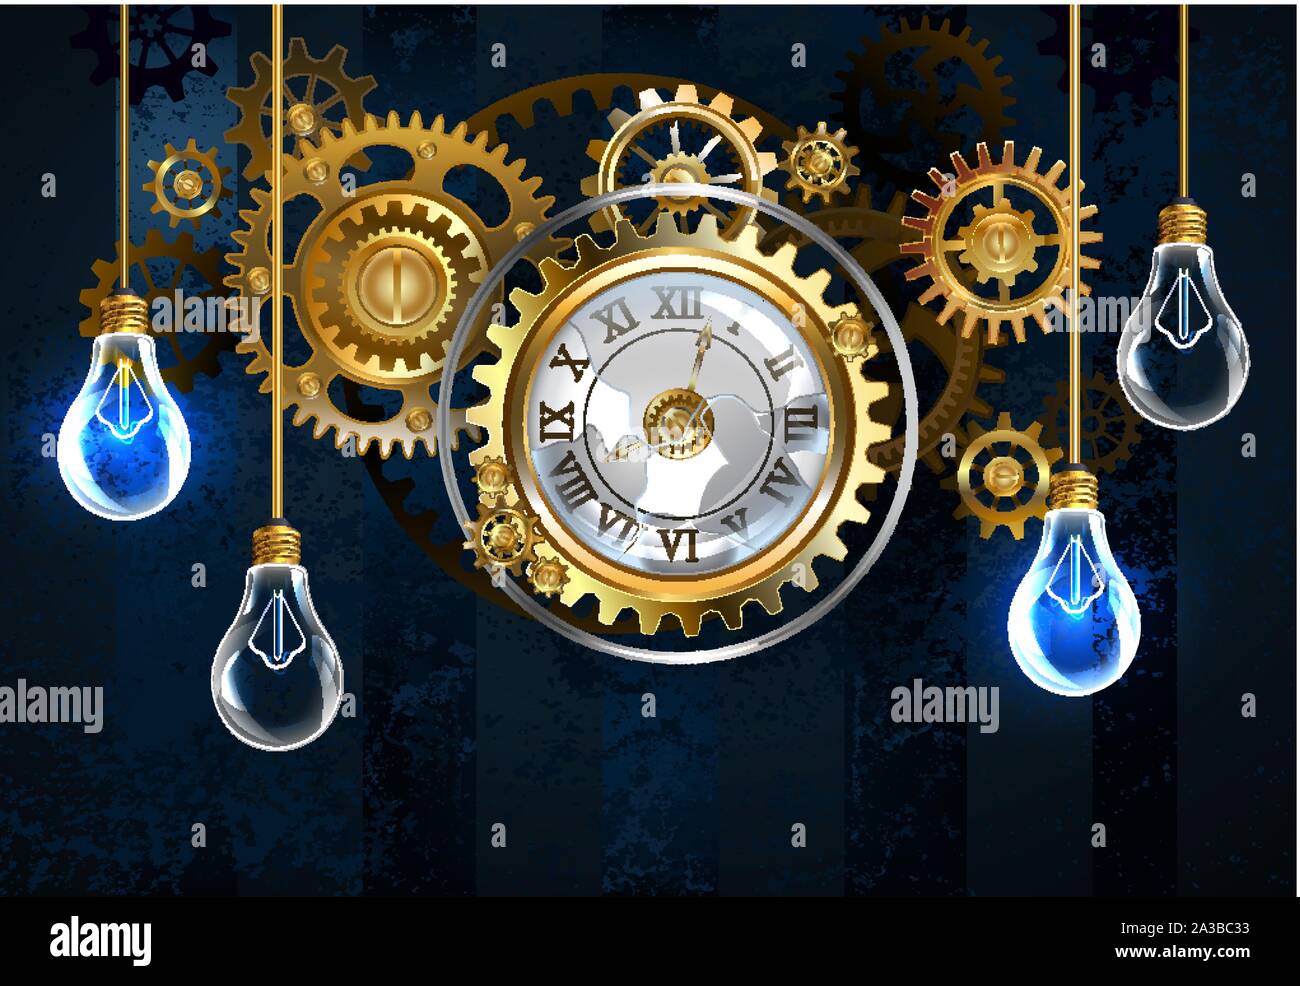 Antique, broken clock in the steampunk style with gold and brass gears on dark, blue, textured background with electric vintage bulbs. Stock Vector